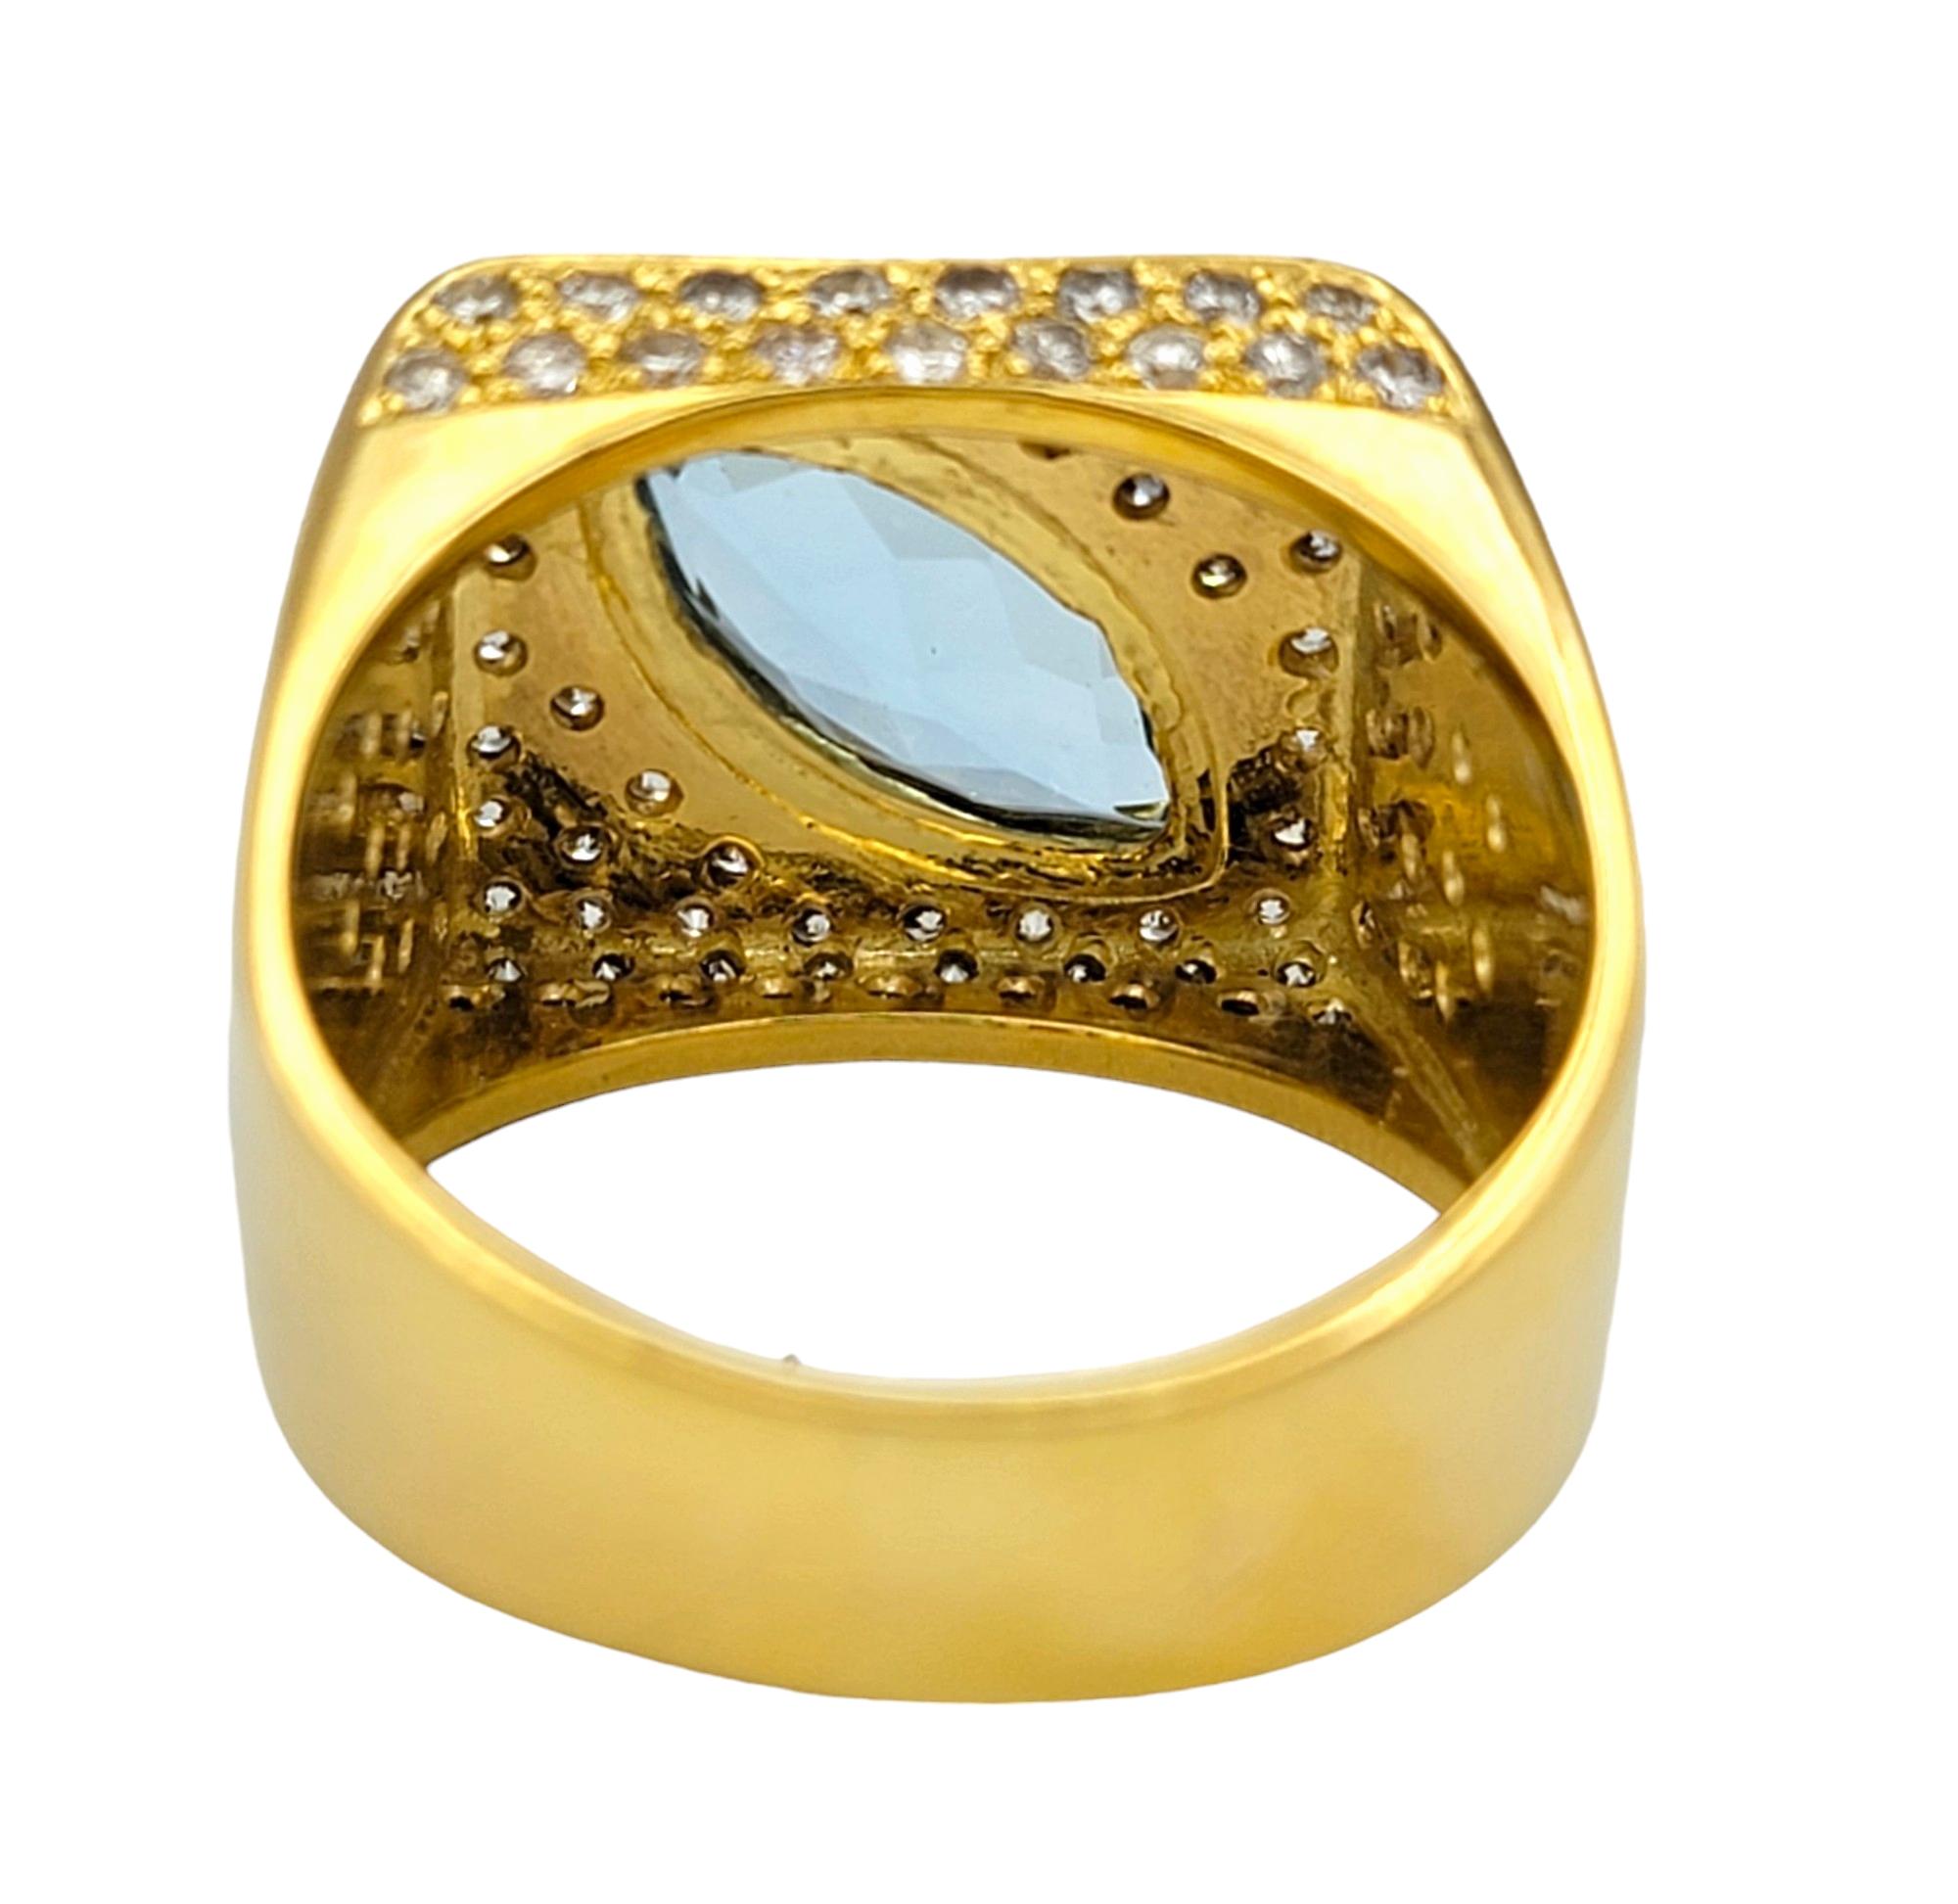 Sophie d'Agon Marquise Cut Aquamarine & Diamond Cocktail Ring in 18K Yellow Gold In Good Condition For Sale In Scottsdale, AZ